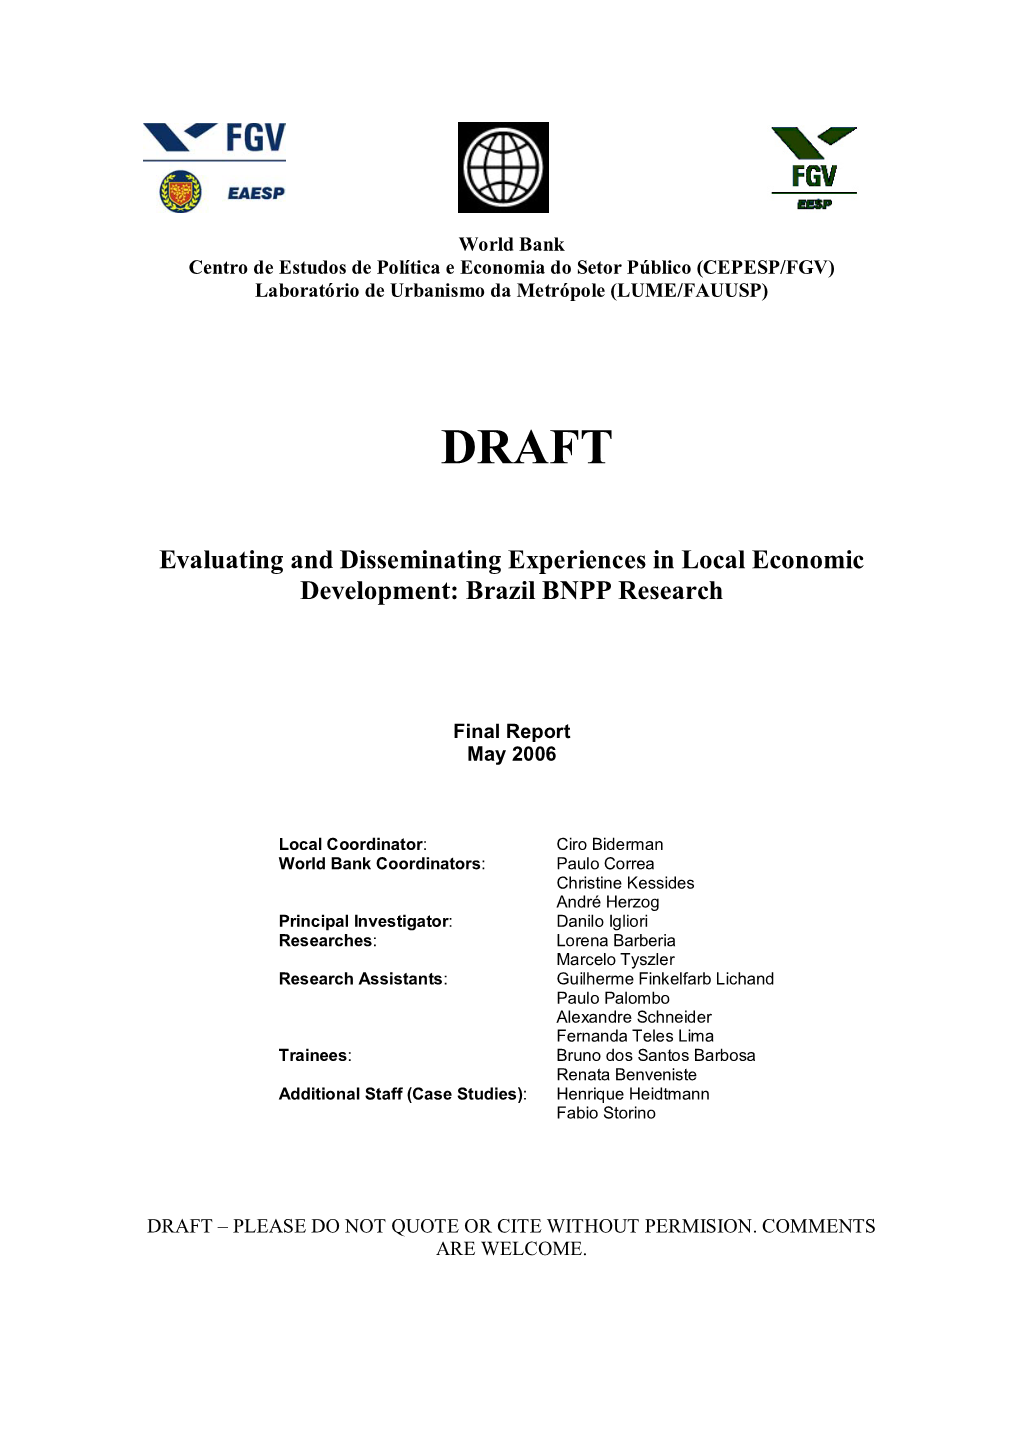 Evaluating and Disseminating Experiences in Local Economic Development: Brazil BNPP Research